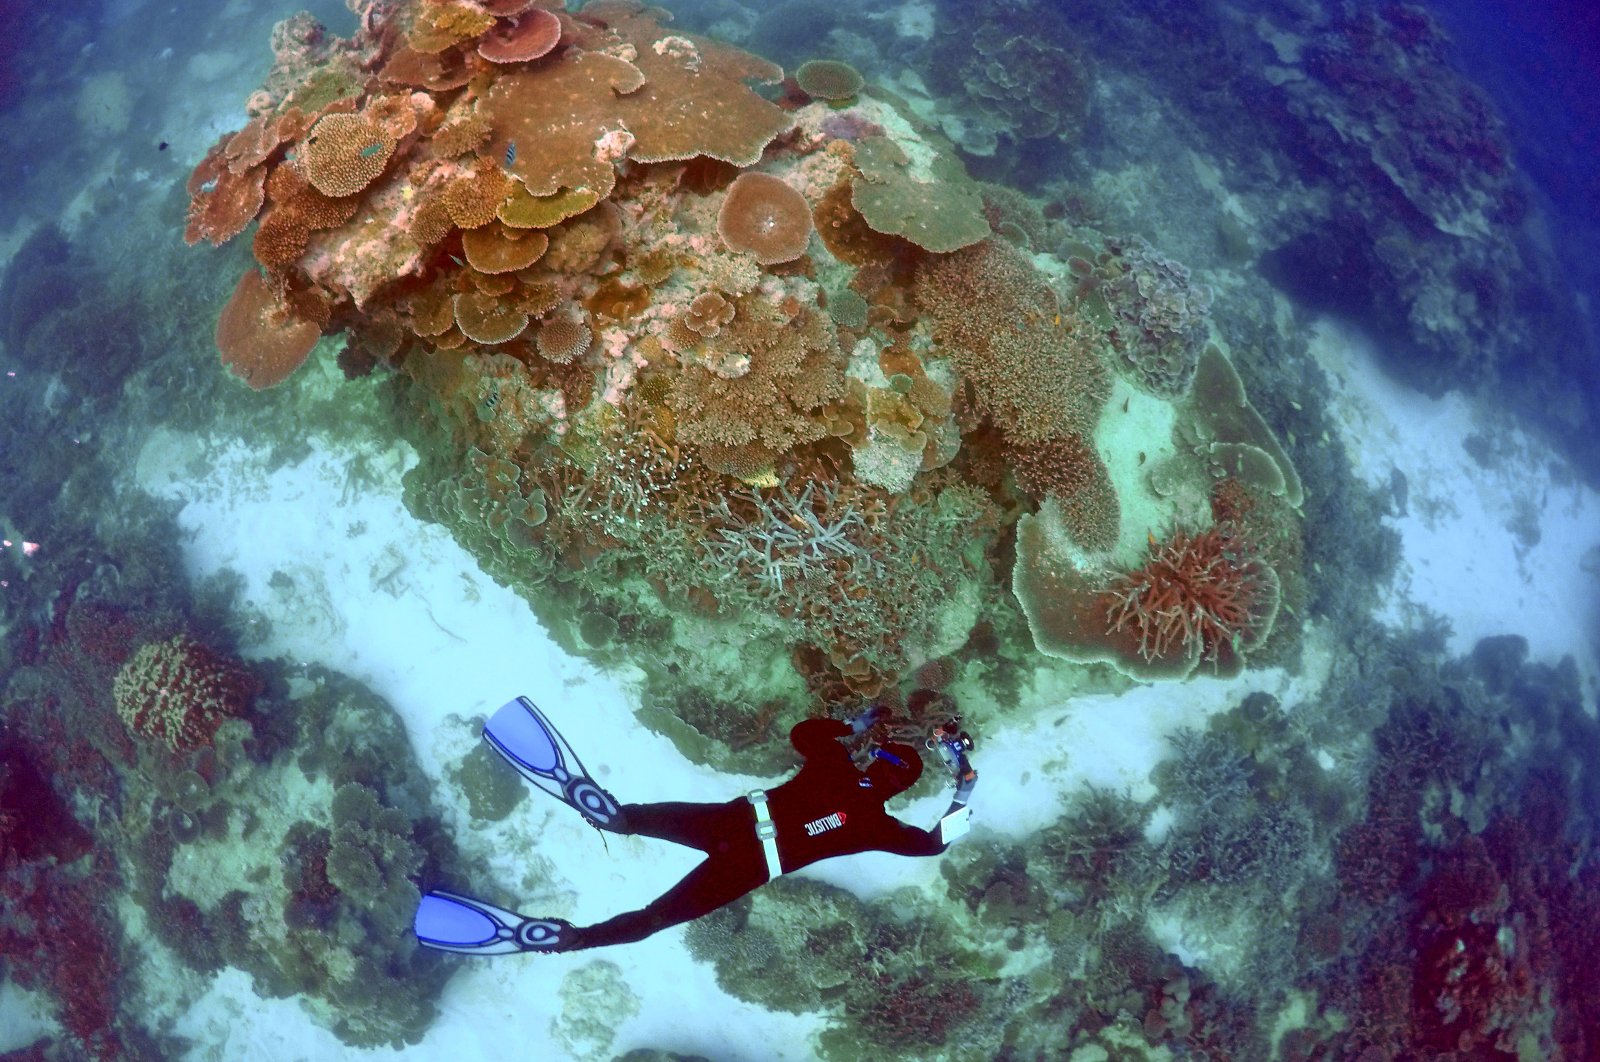 A senior ranger in the Great Barrier Reef region for the Queensland Parks and Wildlife Service takes photographs and notes during an inspection at Lady Elliot Island, June 11, 2015. (REUTERS Photo)